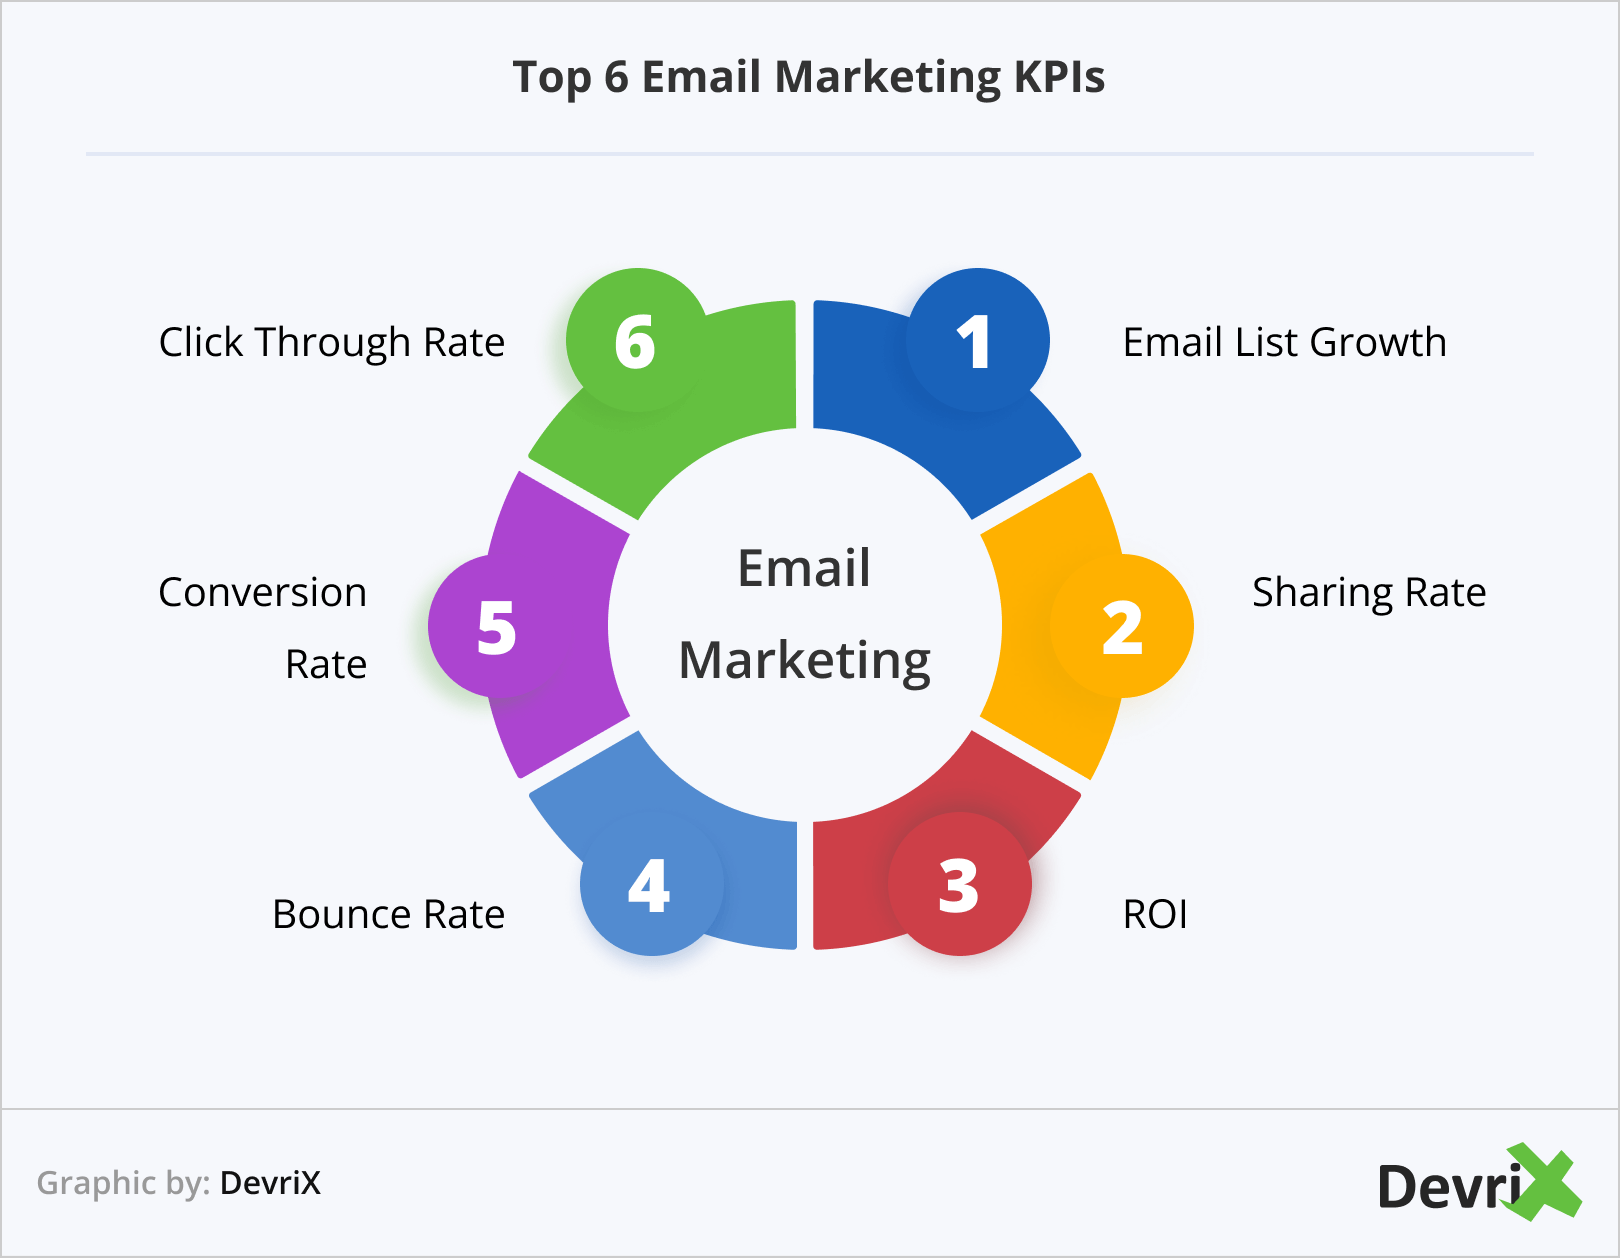 Top 6 Email Marketing KPIs